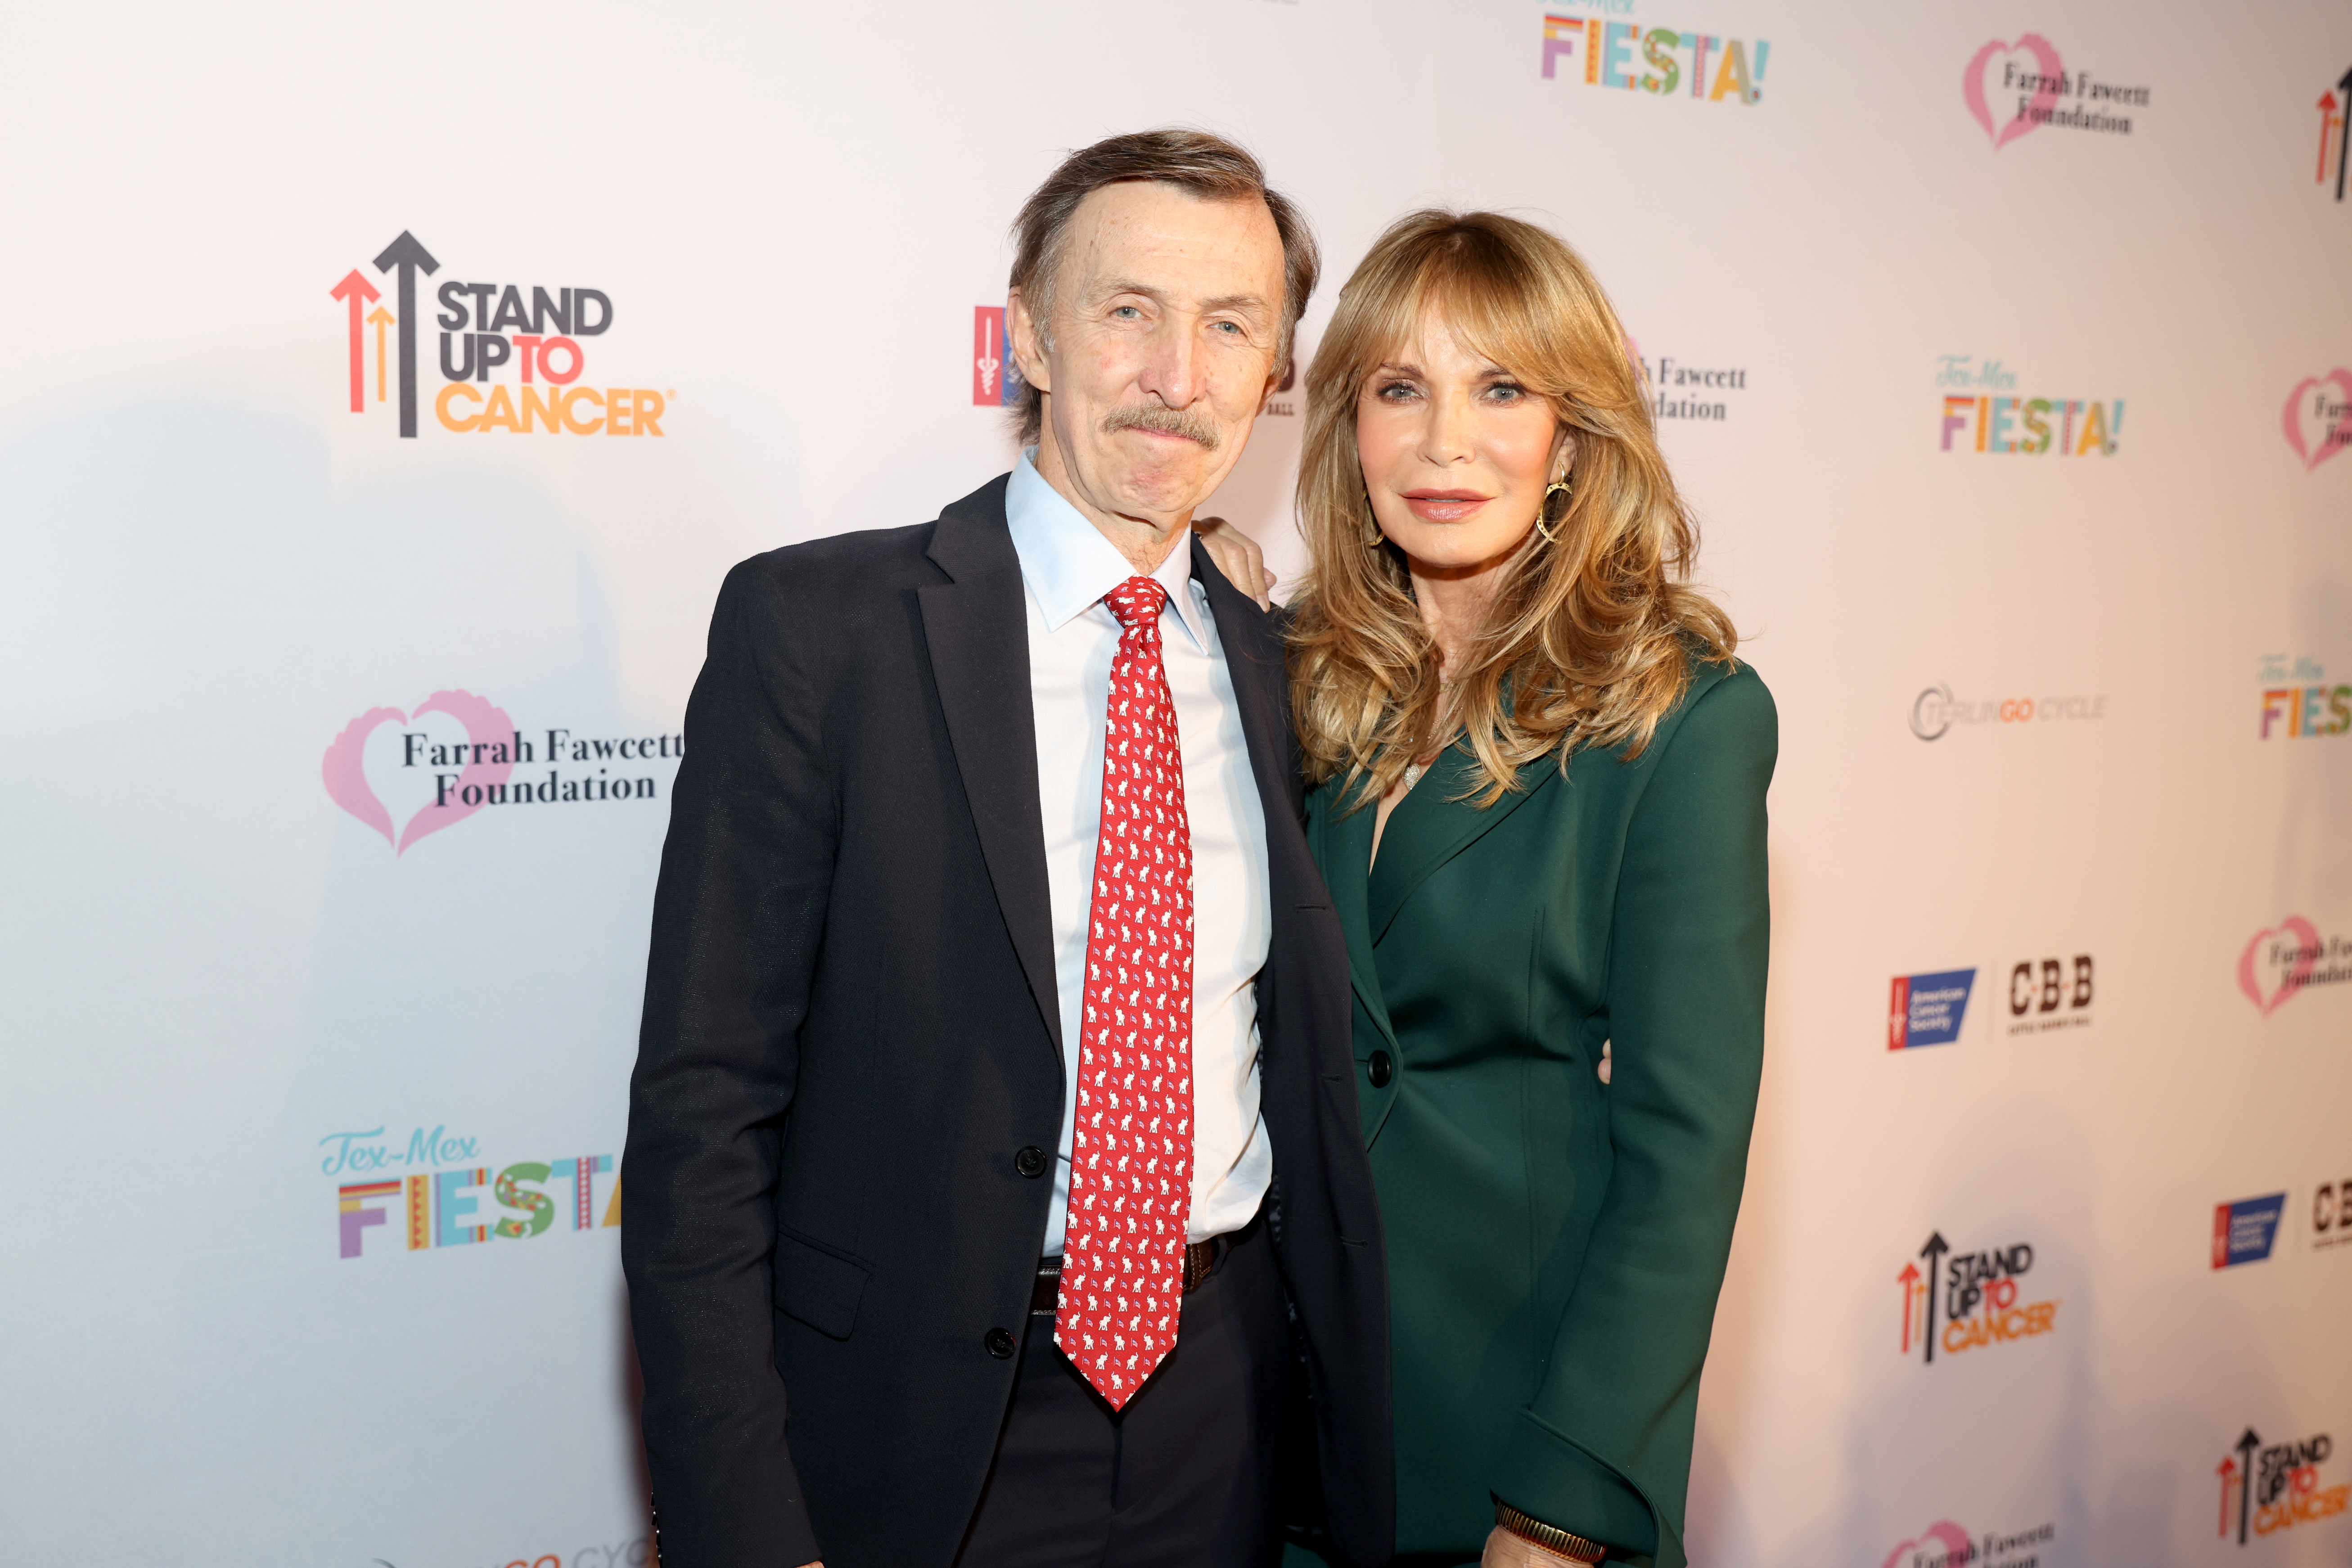 Brad Allen and Jaclyn Smith at the Tex-Mex Fiesta Benefit in Dallas, Texas on October 20, 2022 | Source: Getty Images